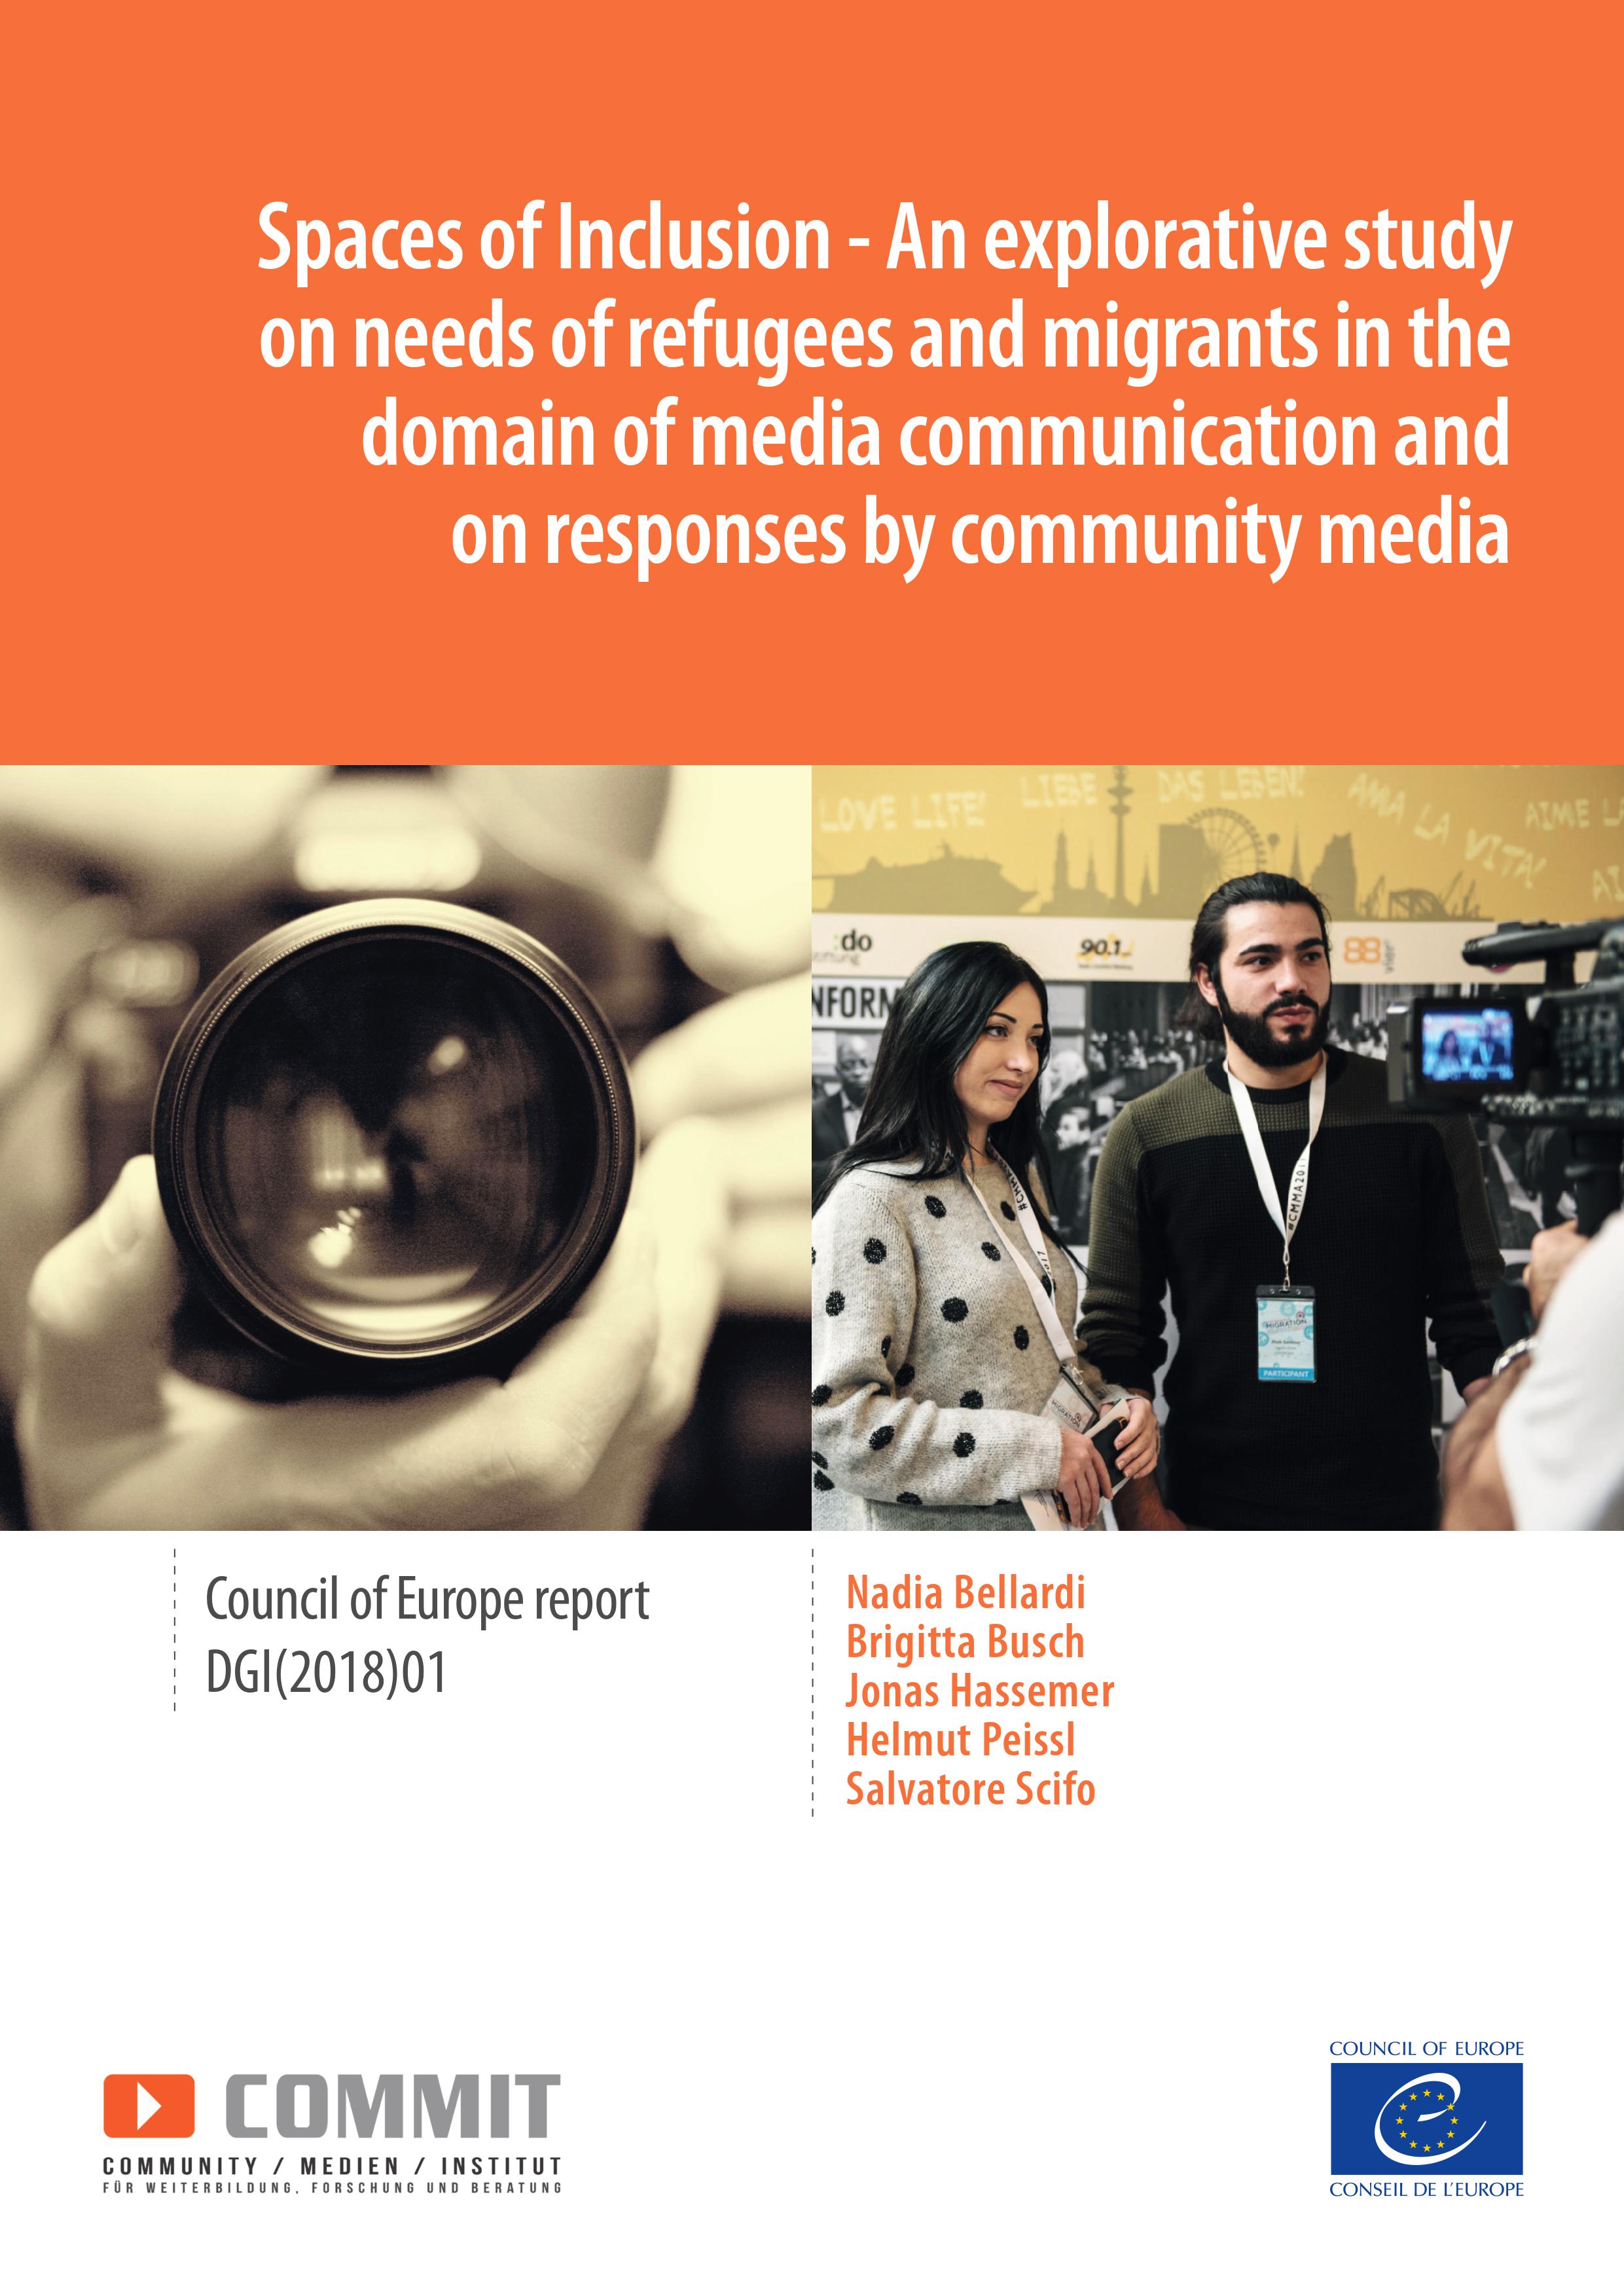 “Spaces of Inclusion - Needs of refugees and migrants in the domain of media communication and on responses by community media” (2018)